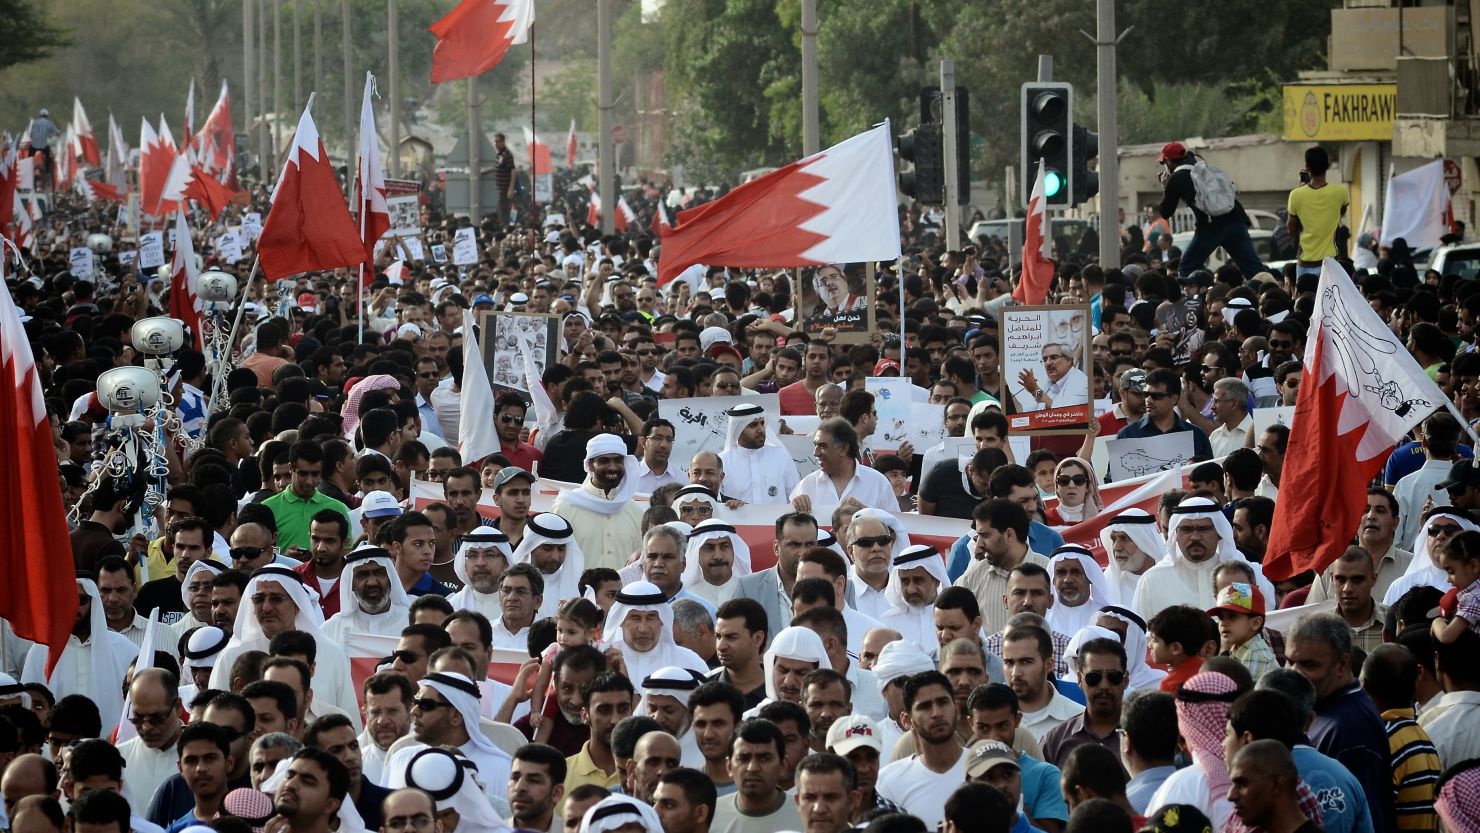 Bahraini Shiite Muslims march during a demonstration in the village of Jidhafs, west of Manama, on April 27, 2012. 